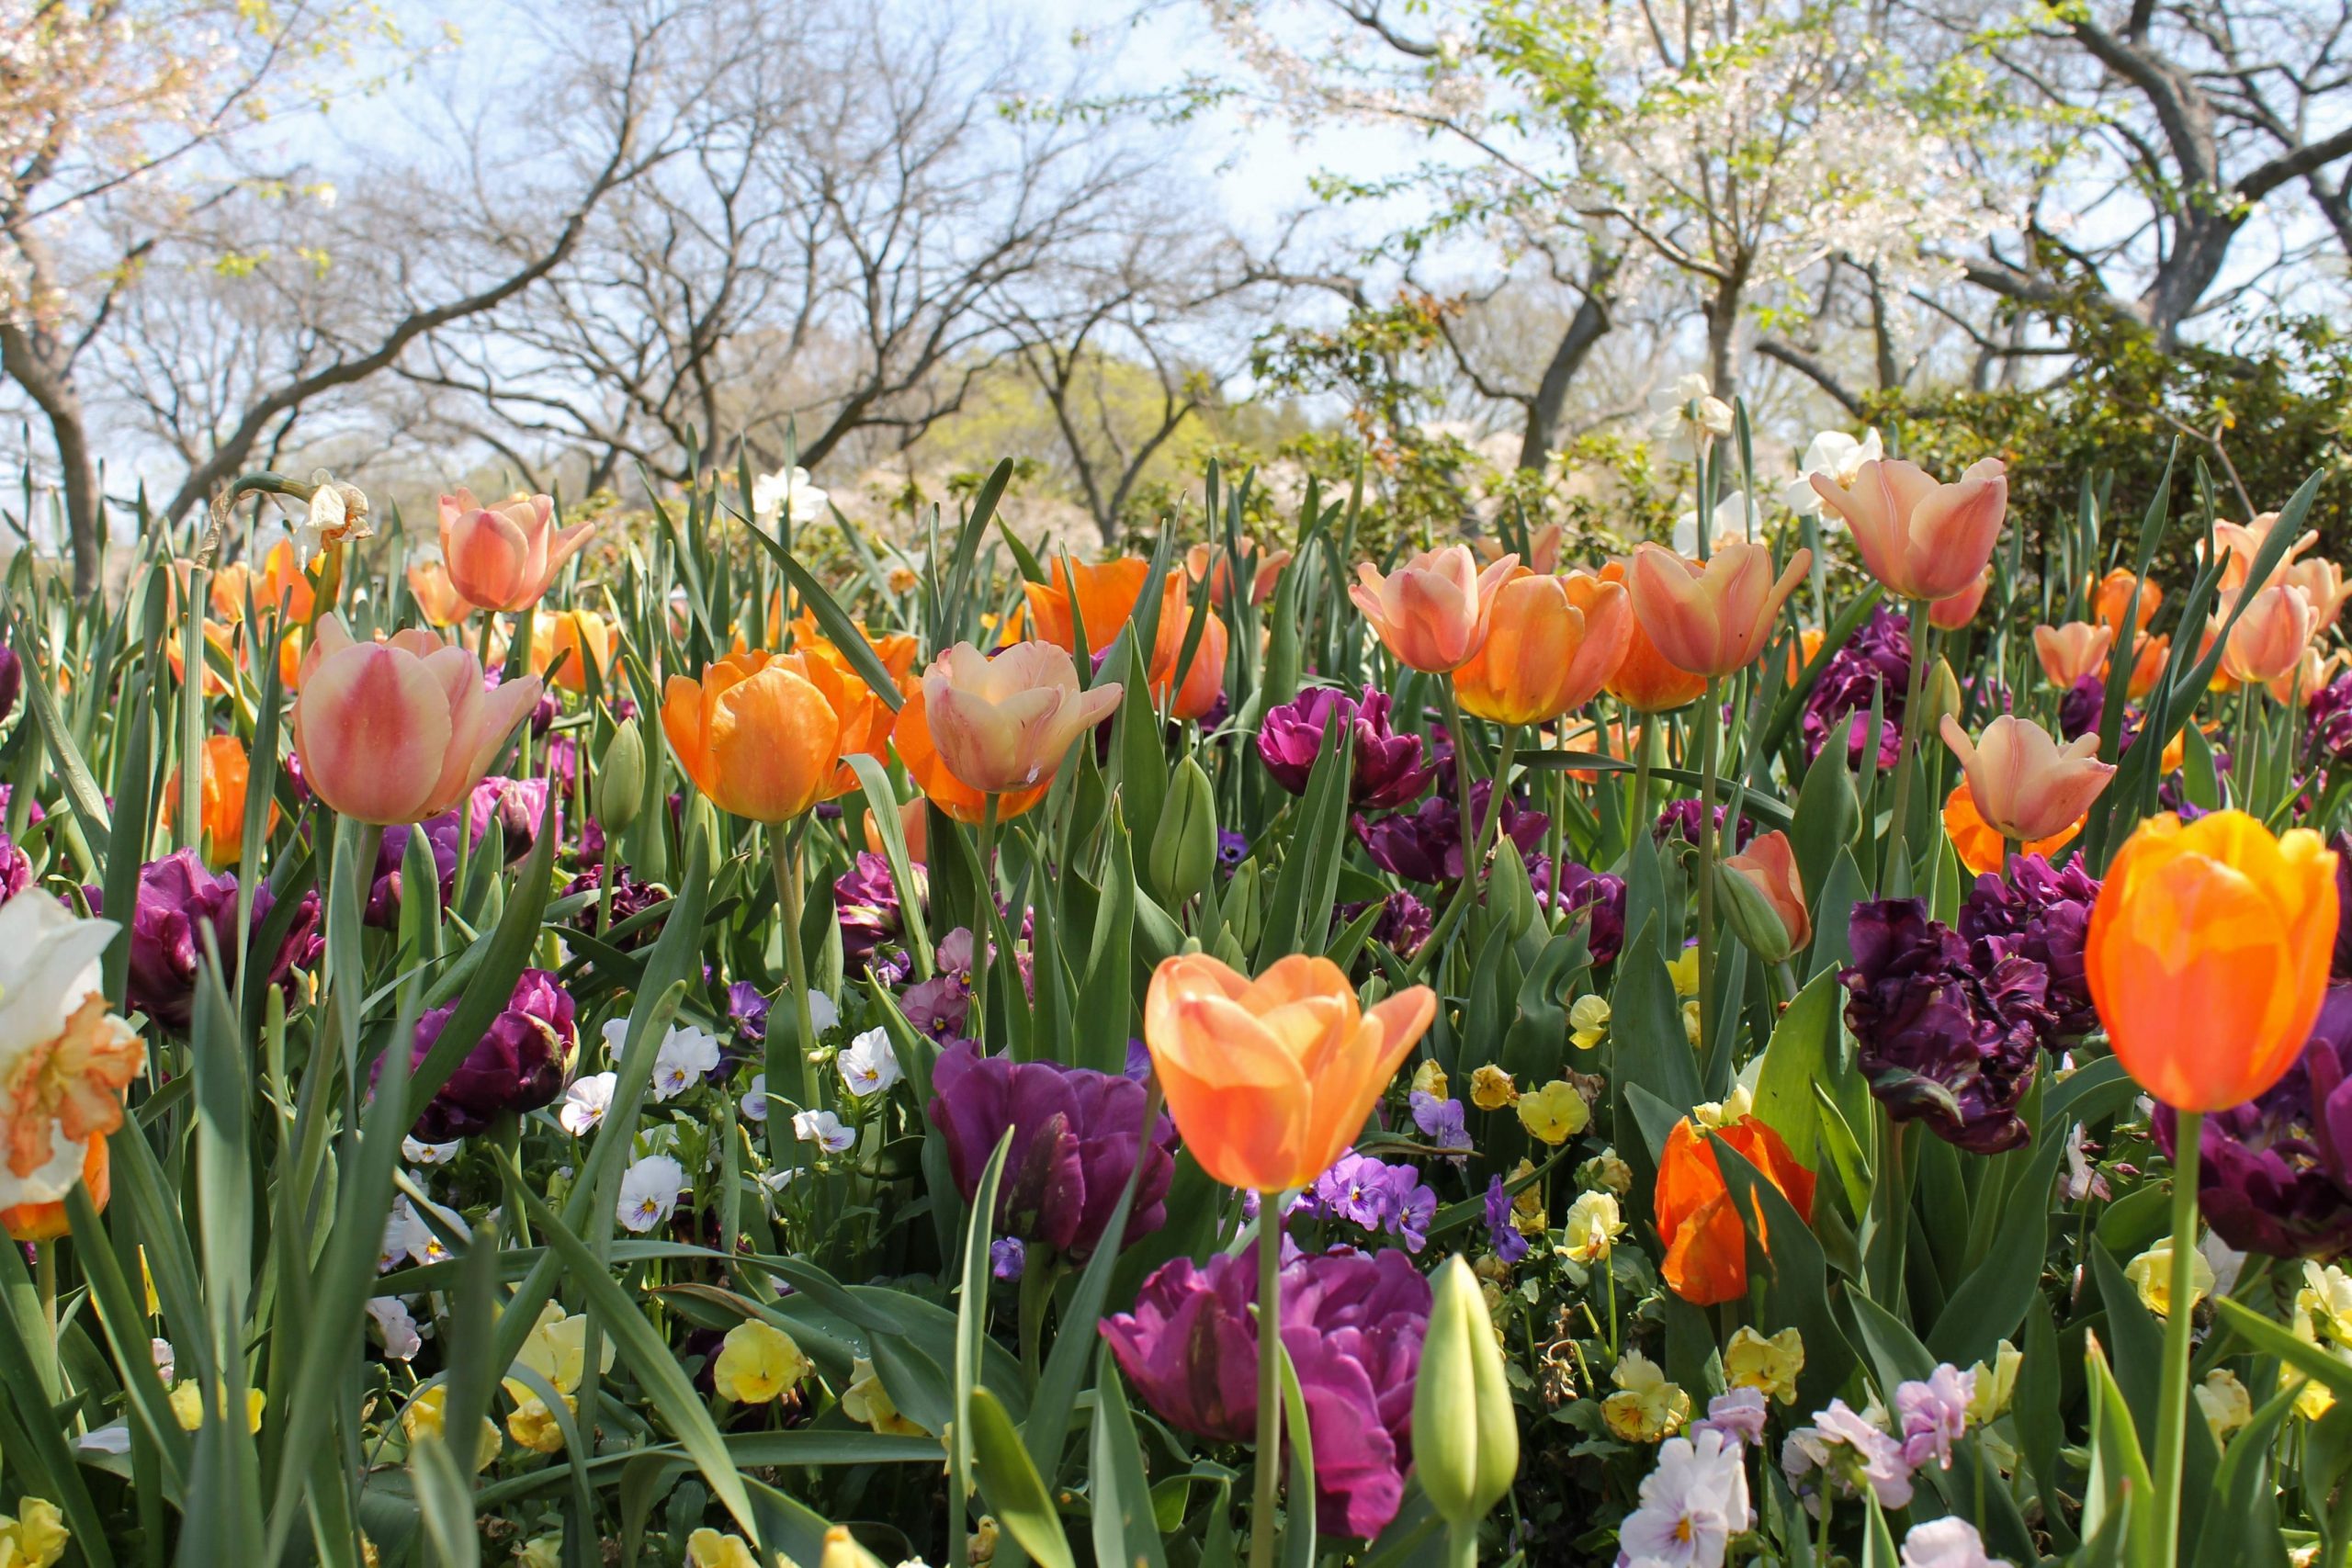 Longwood Gardens, Tyler Arboretum and More Public Gardens to Visit This Spring